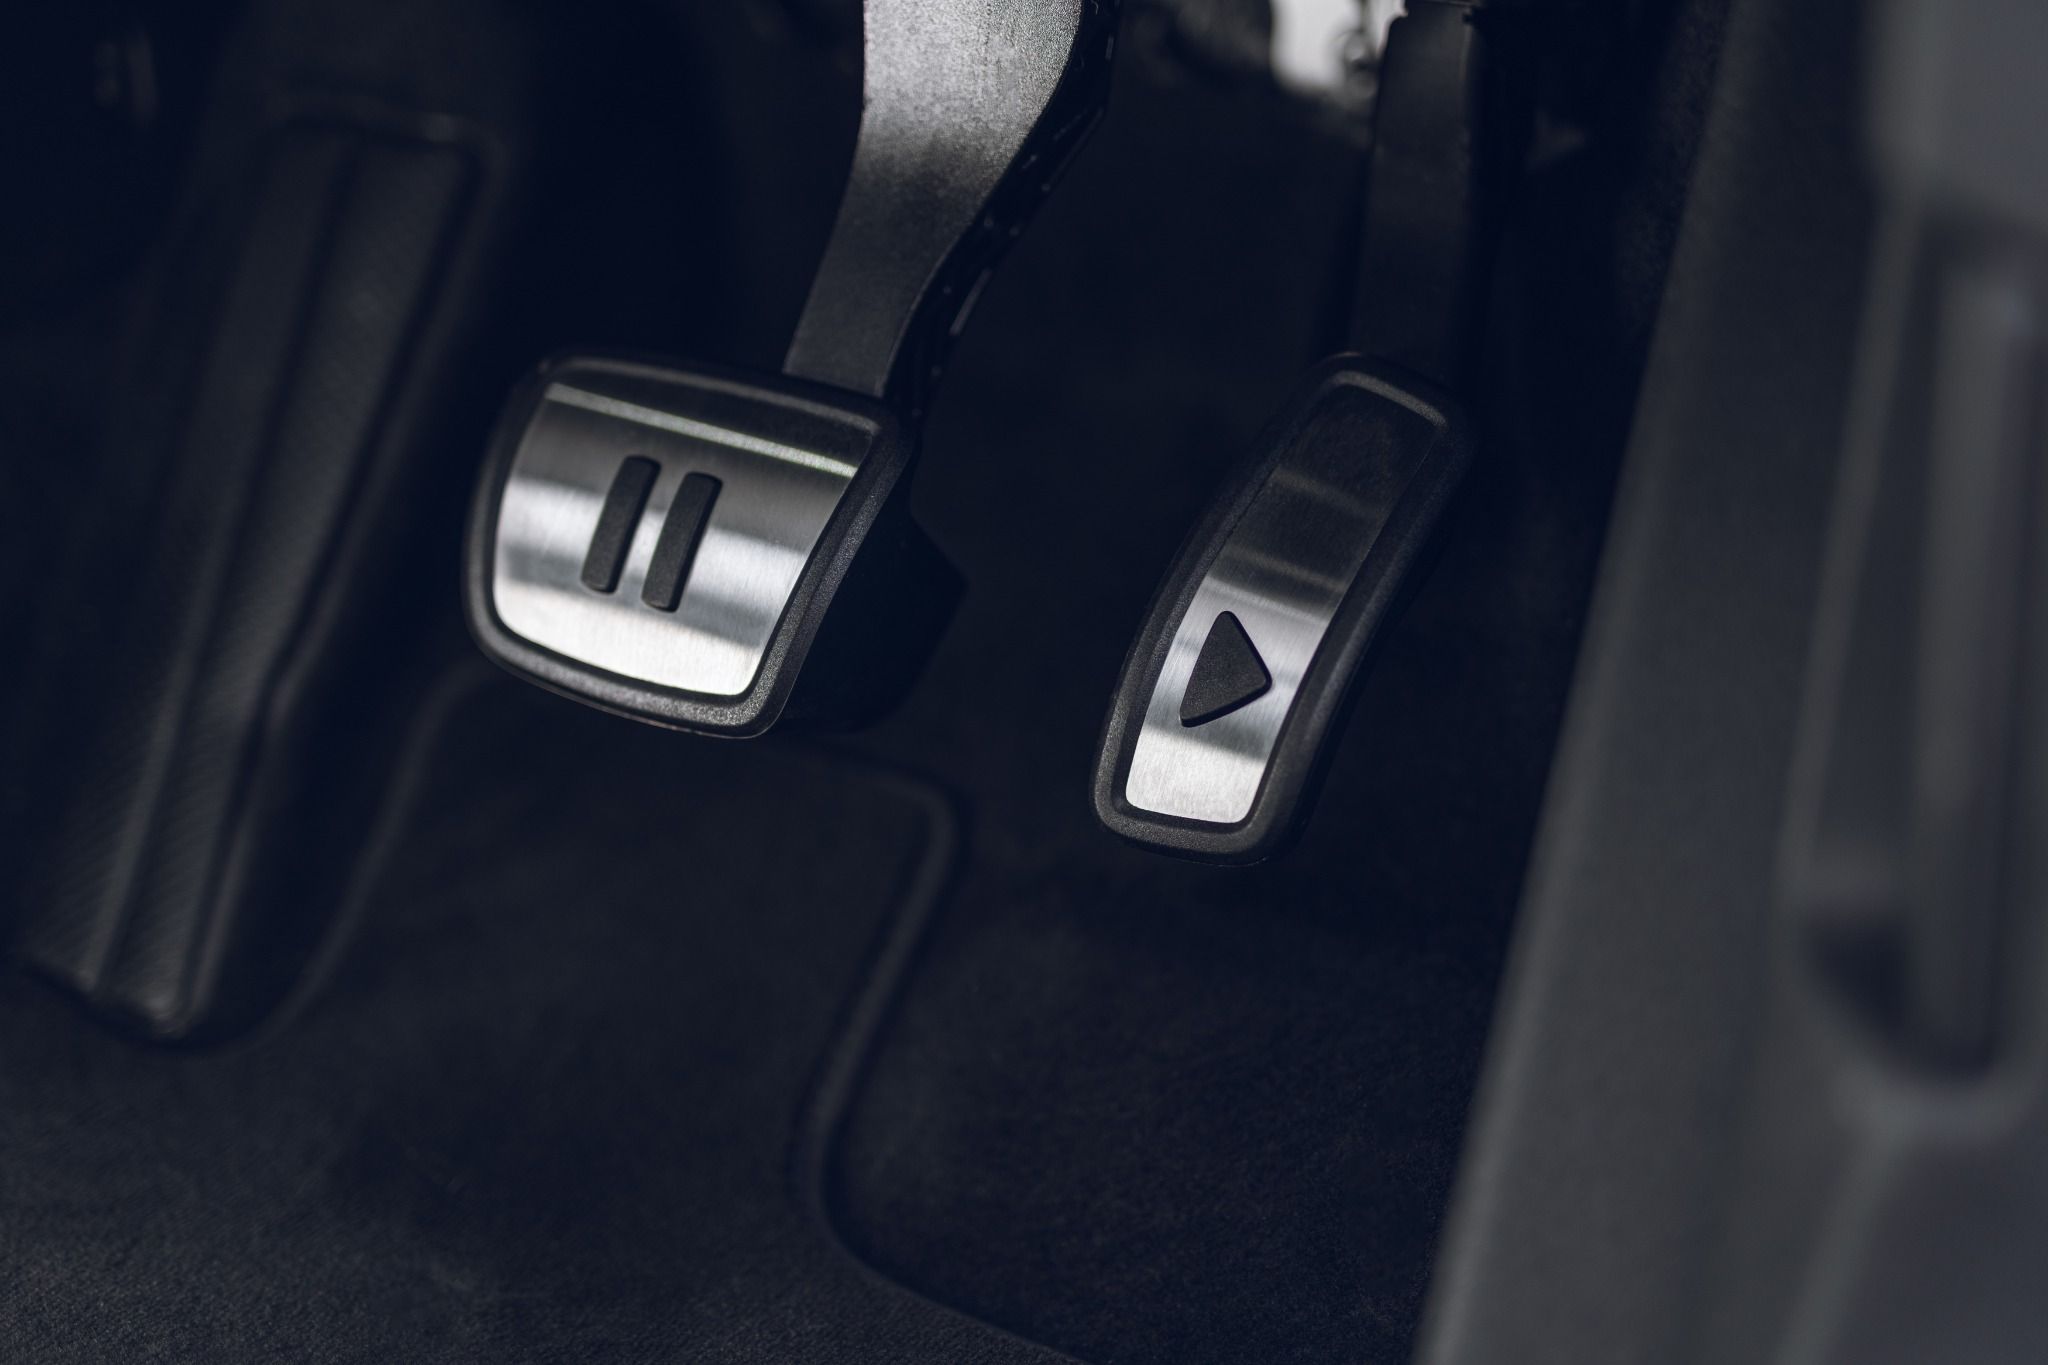 Close up of pedals in an EV